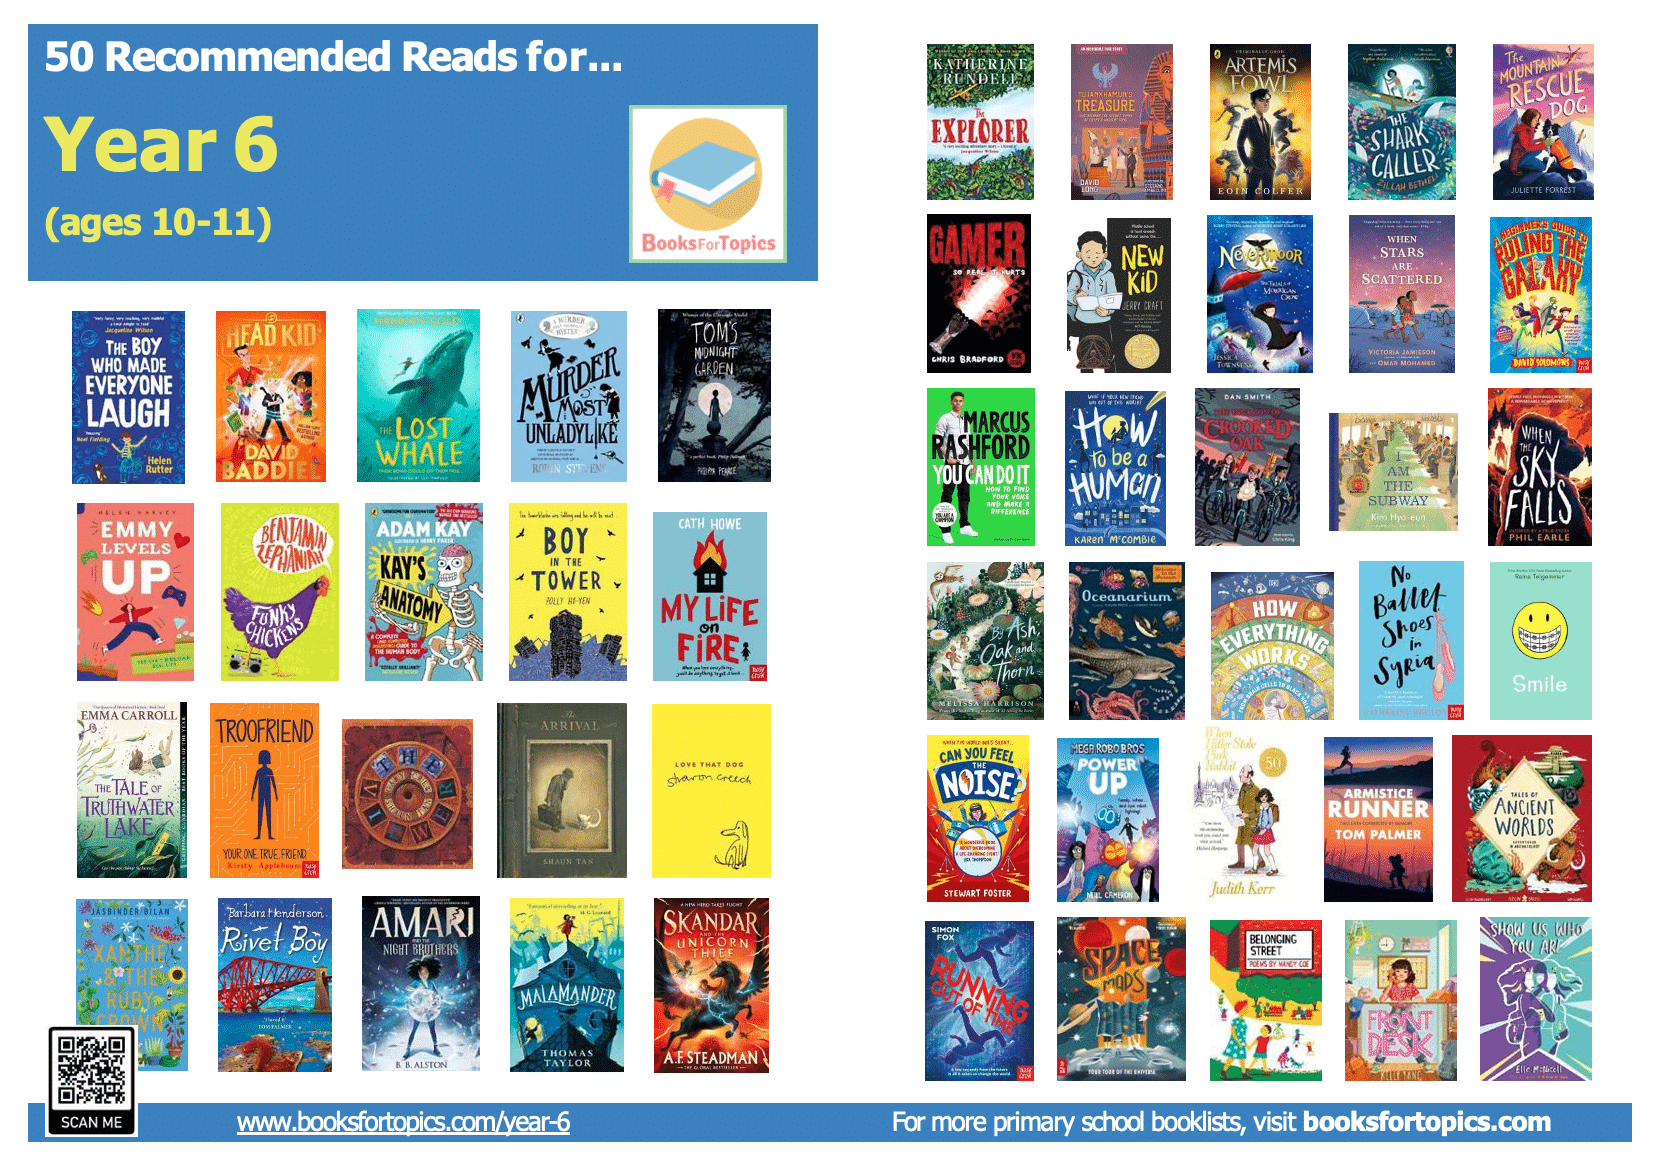 y6 recommended reading list poster